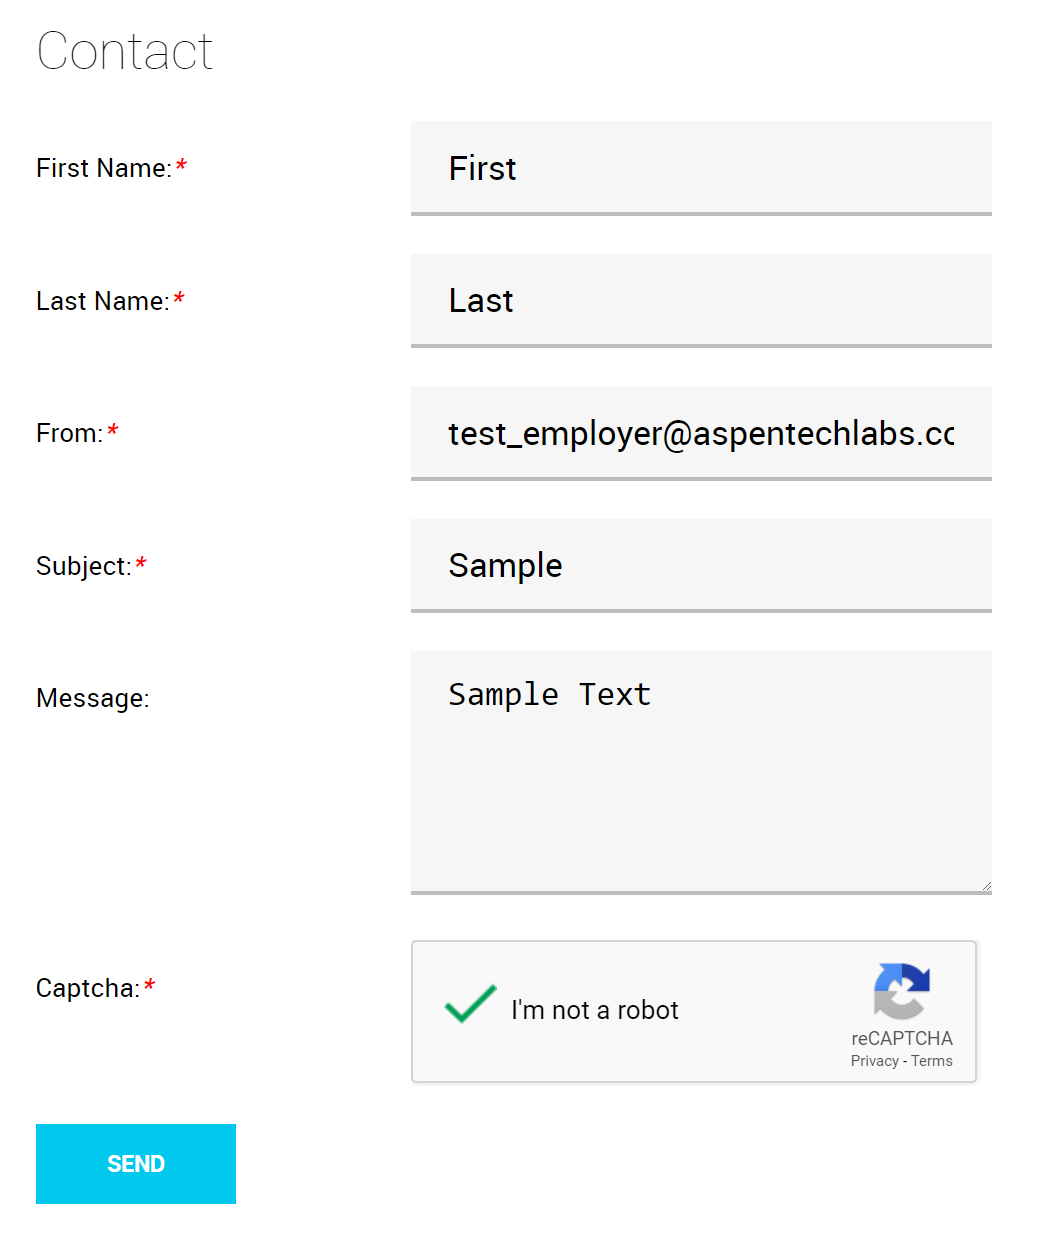 Application tracking and contact candidate form